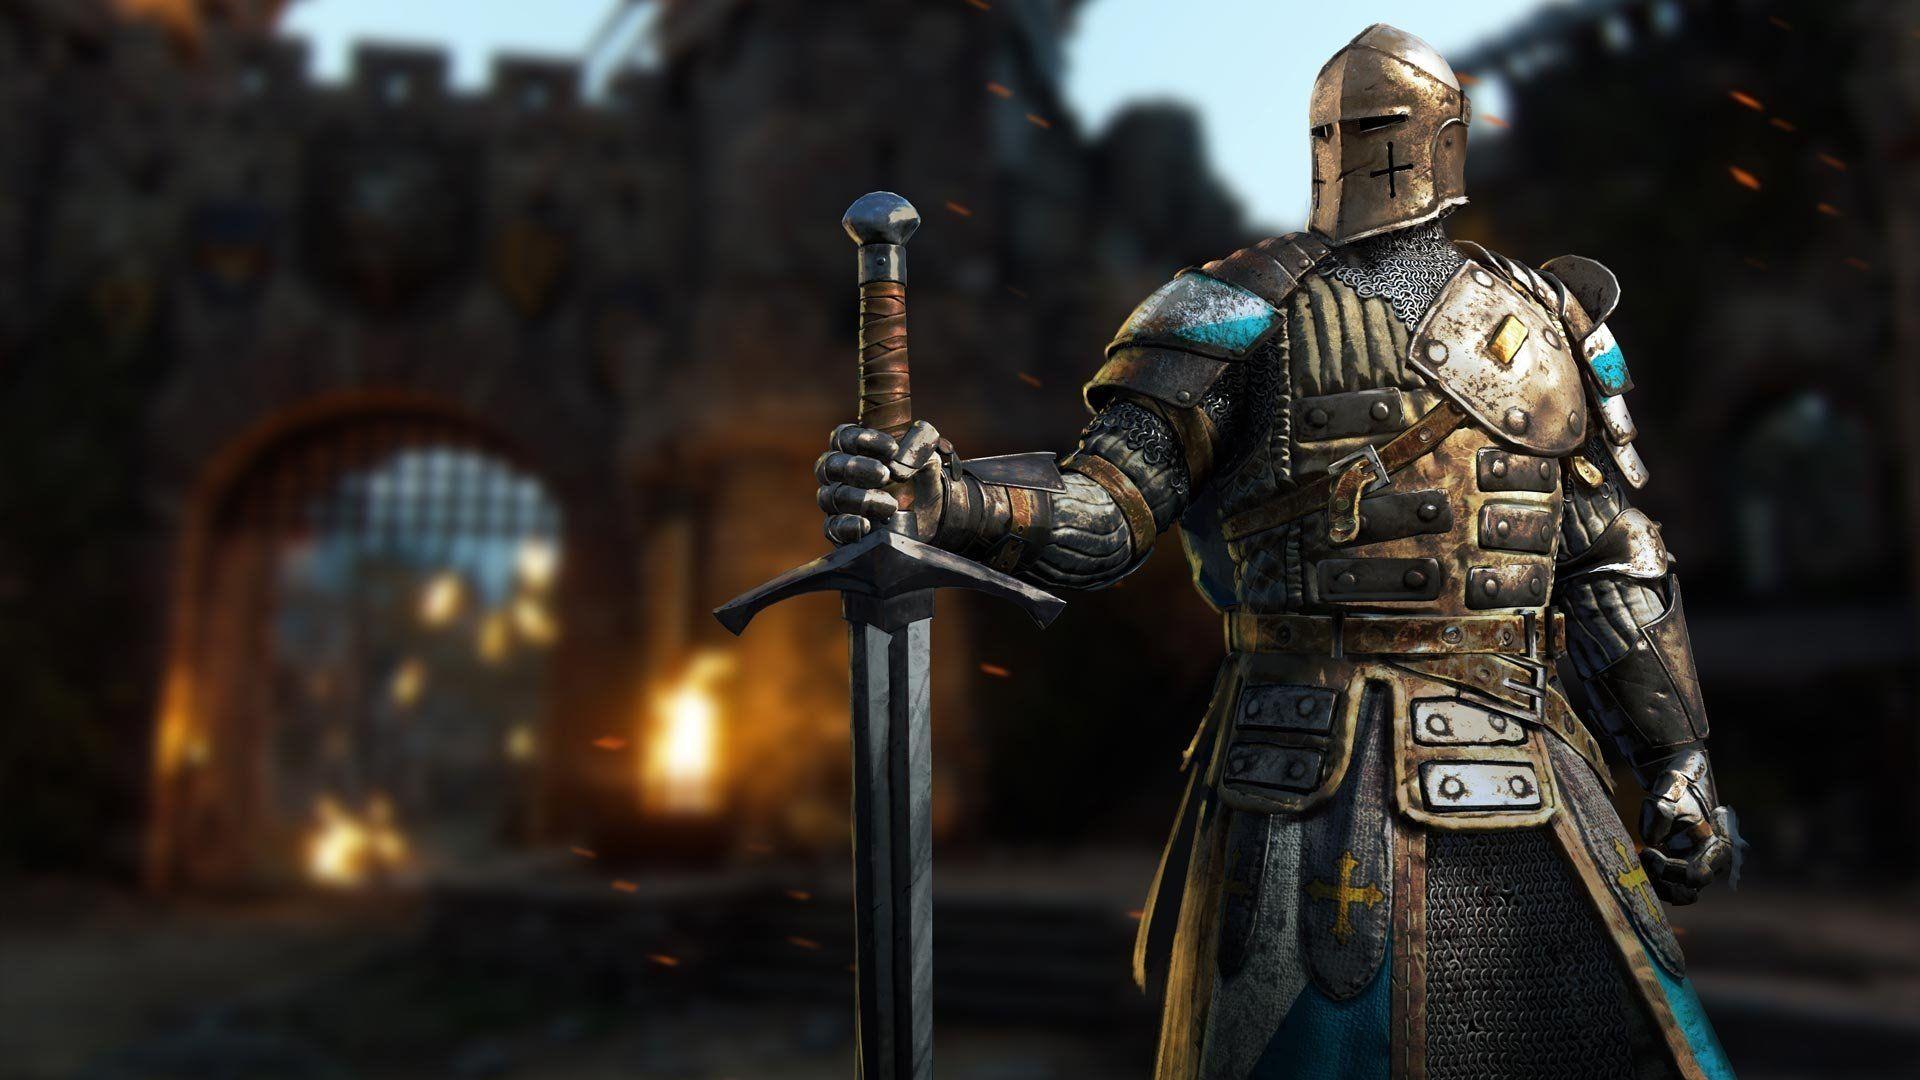 orochi for honor download